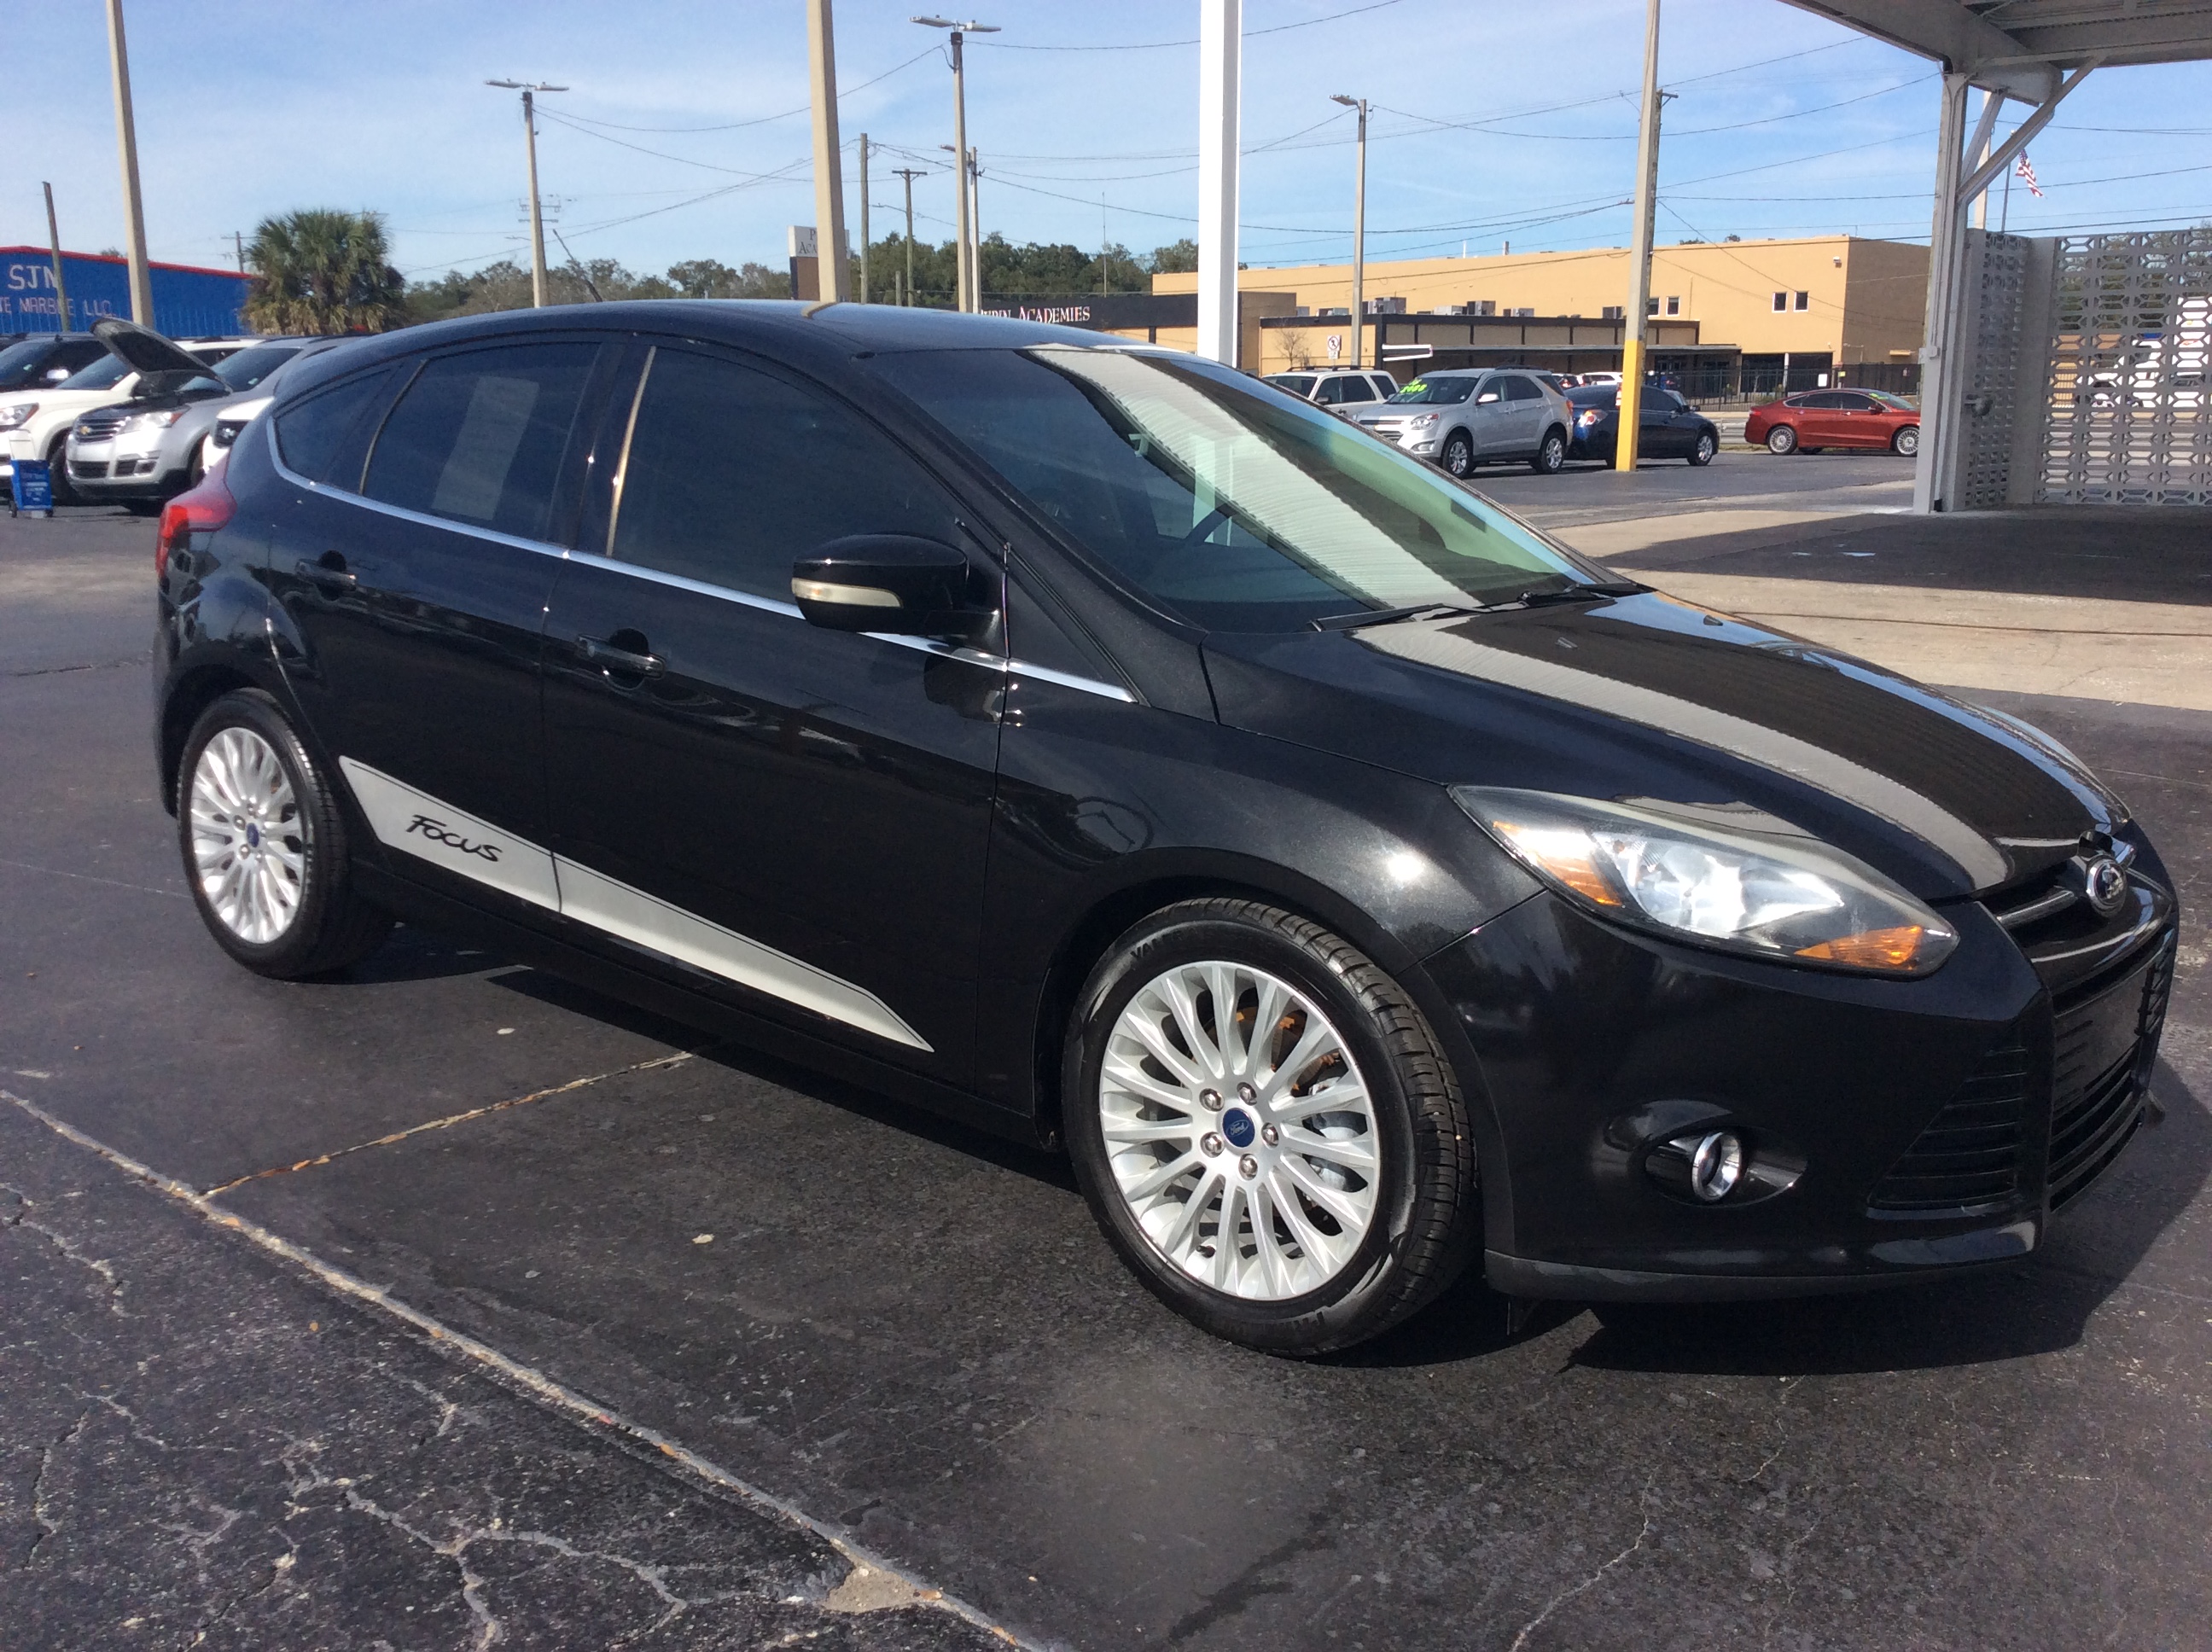 Pre-Owned 2012 Ford Focus Titanium Hatchback 4 Dr. in Tampa #0496 | Car ...